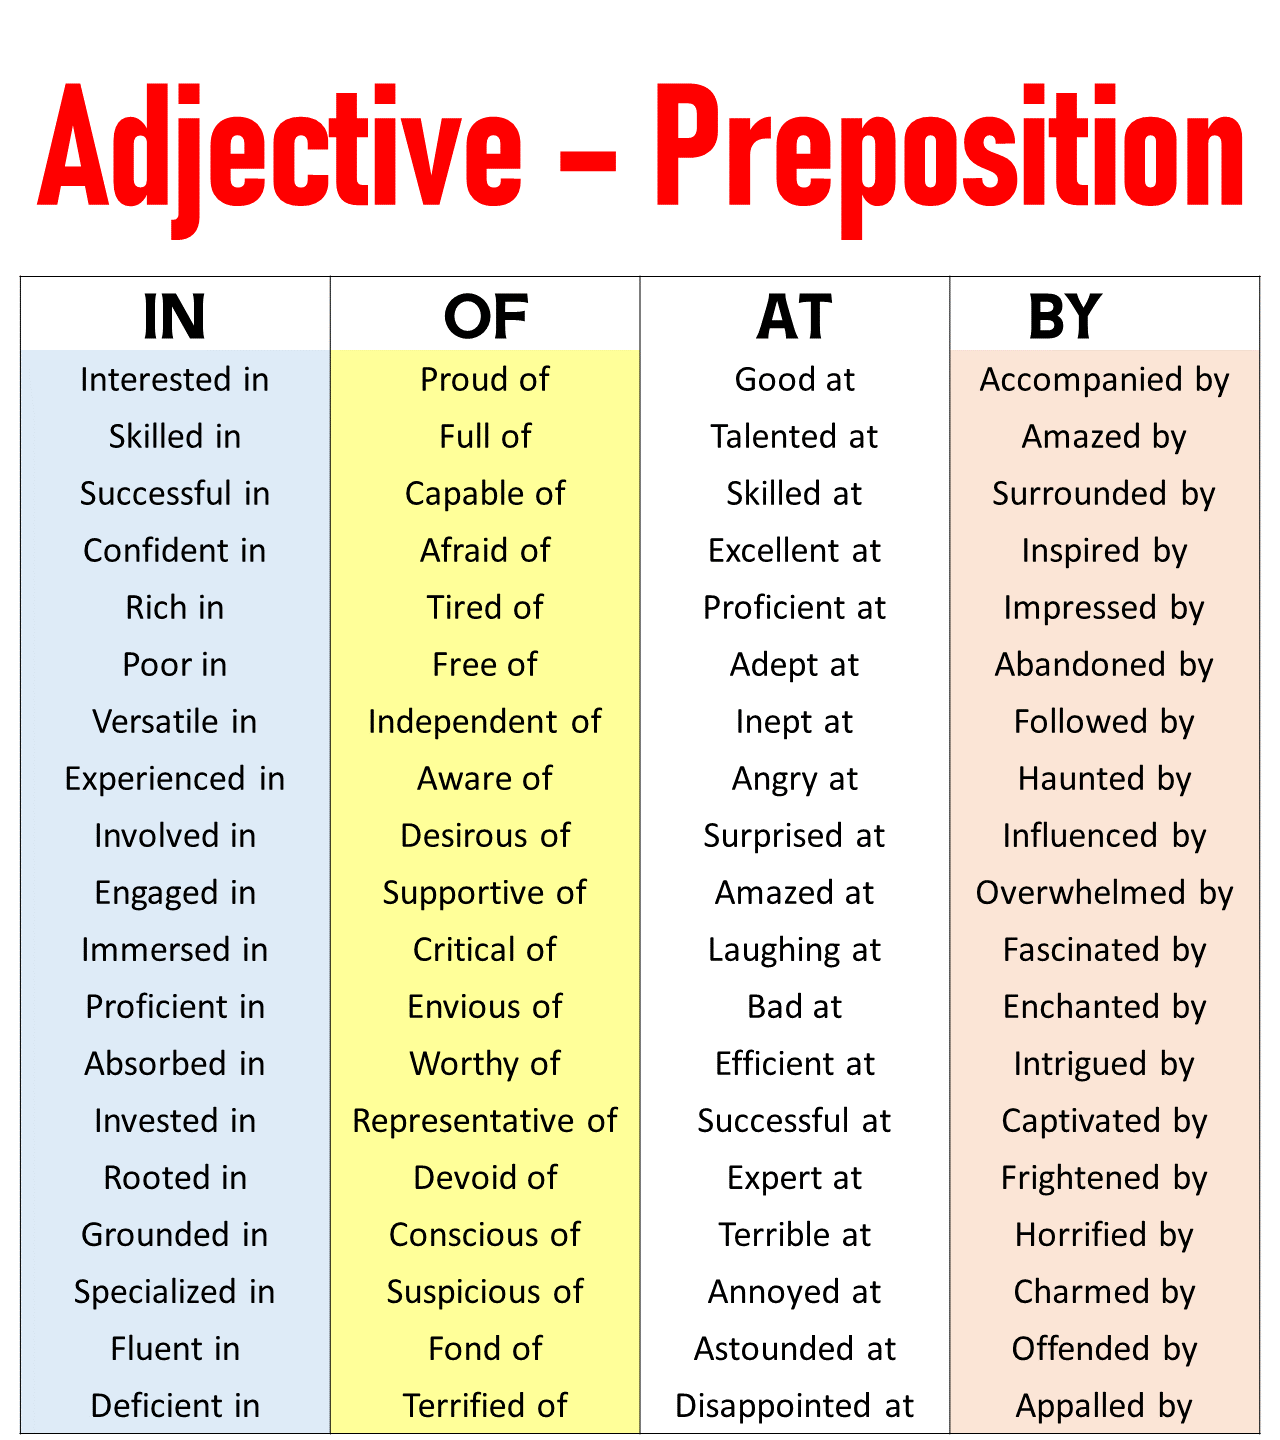 Adjective and Preposition Combinations